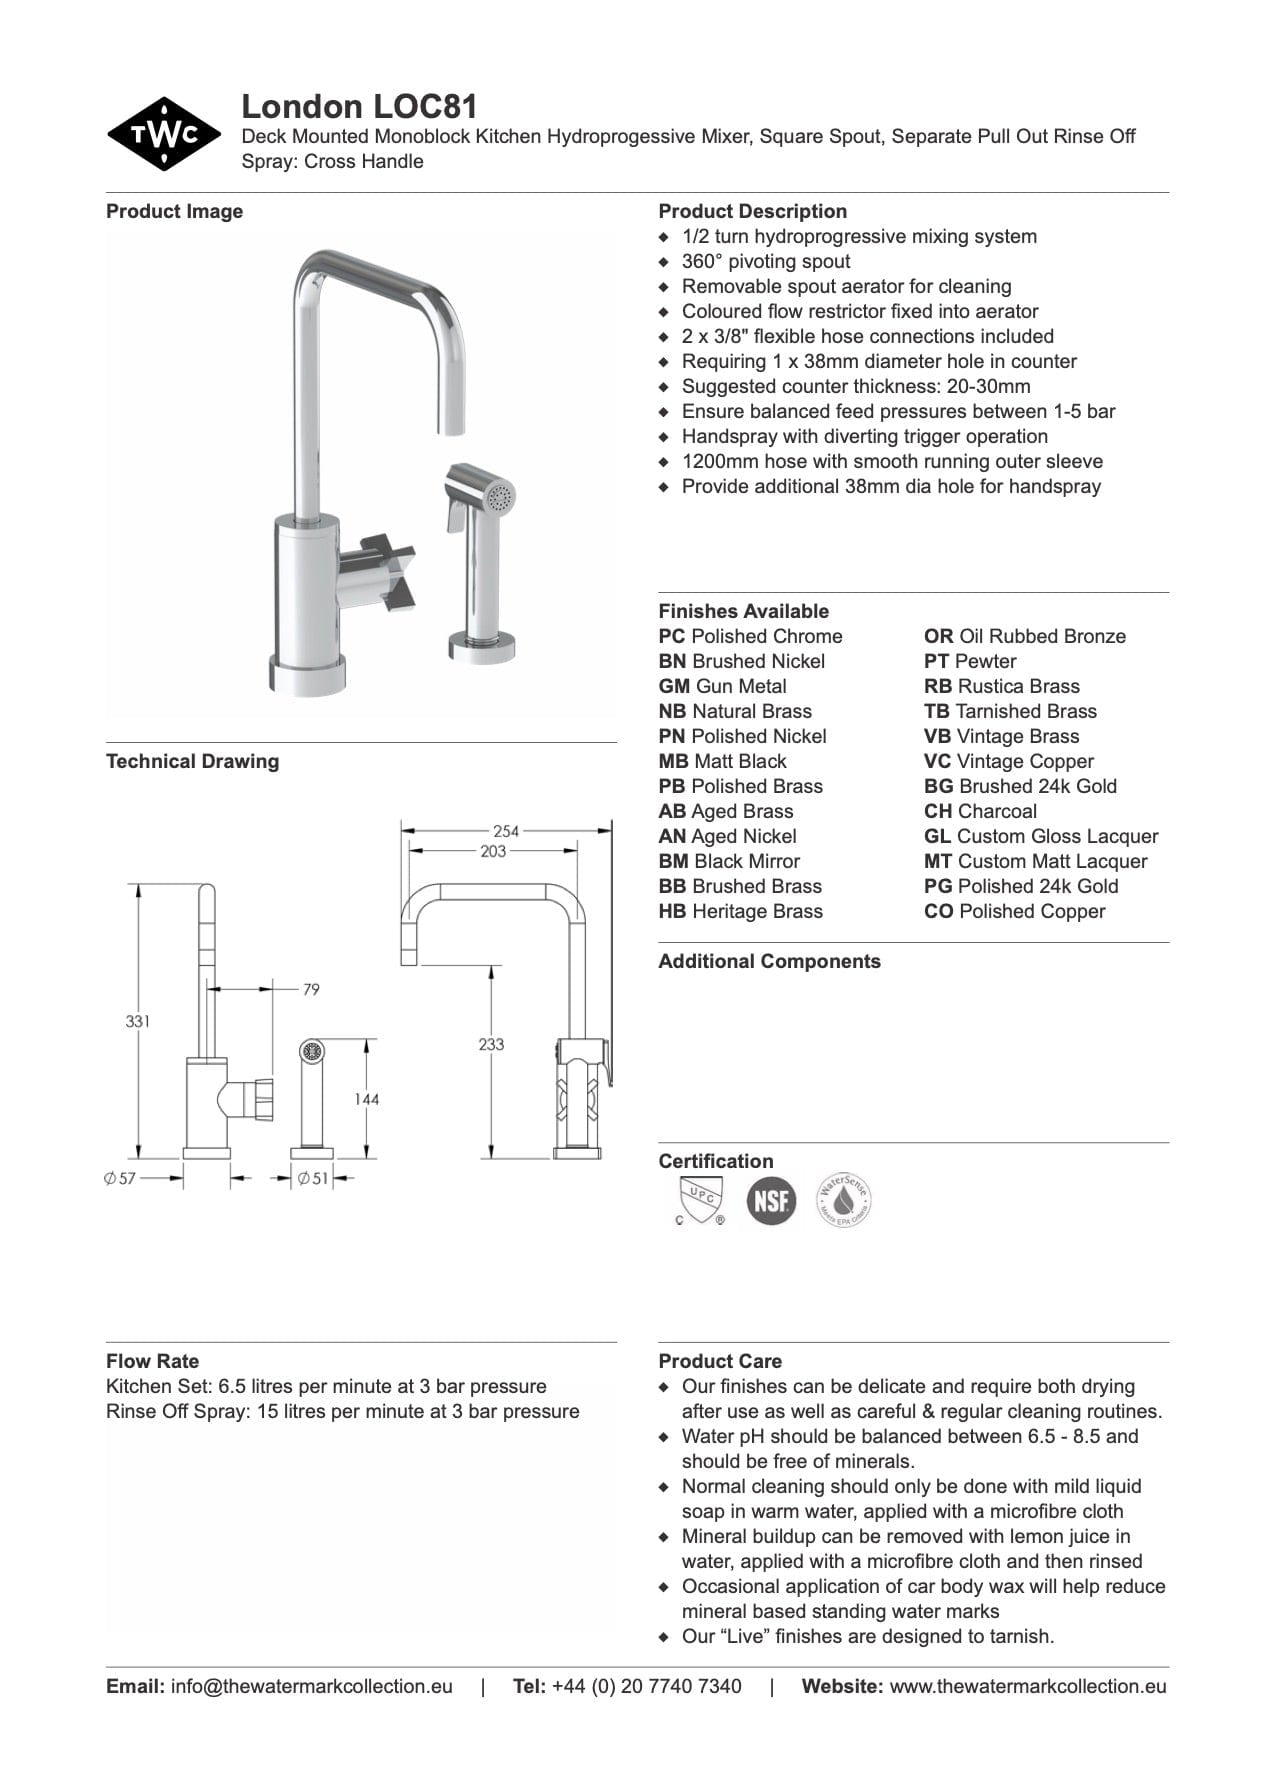 The Watermark Collection Kitchen Taps Polished Chrome The Watermark Collection London Monoblock Kitchen Mixer with Square Spout & Seperate Pull Out Rinse Spray | Cross Handle